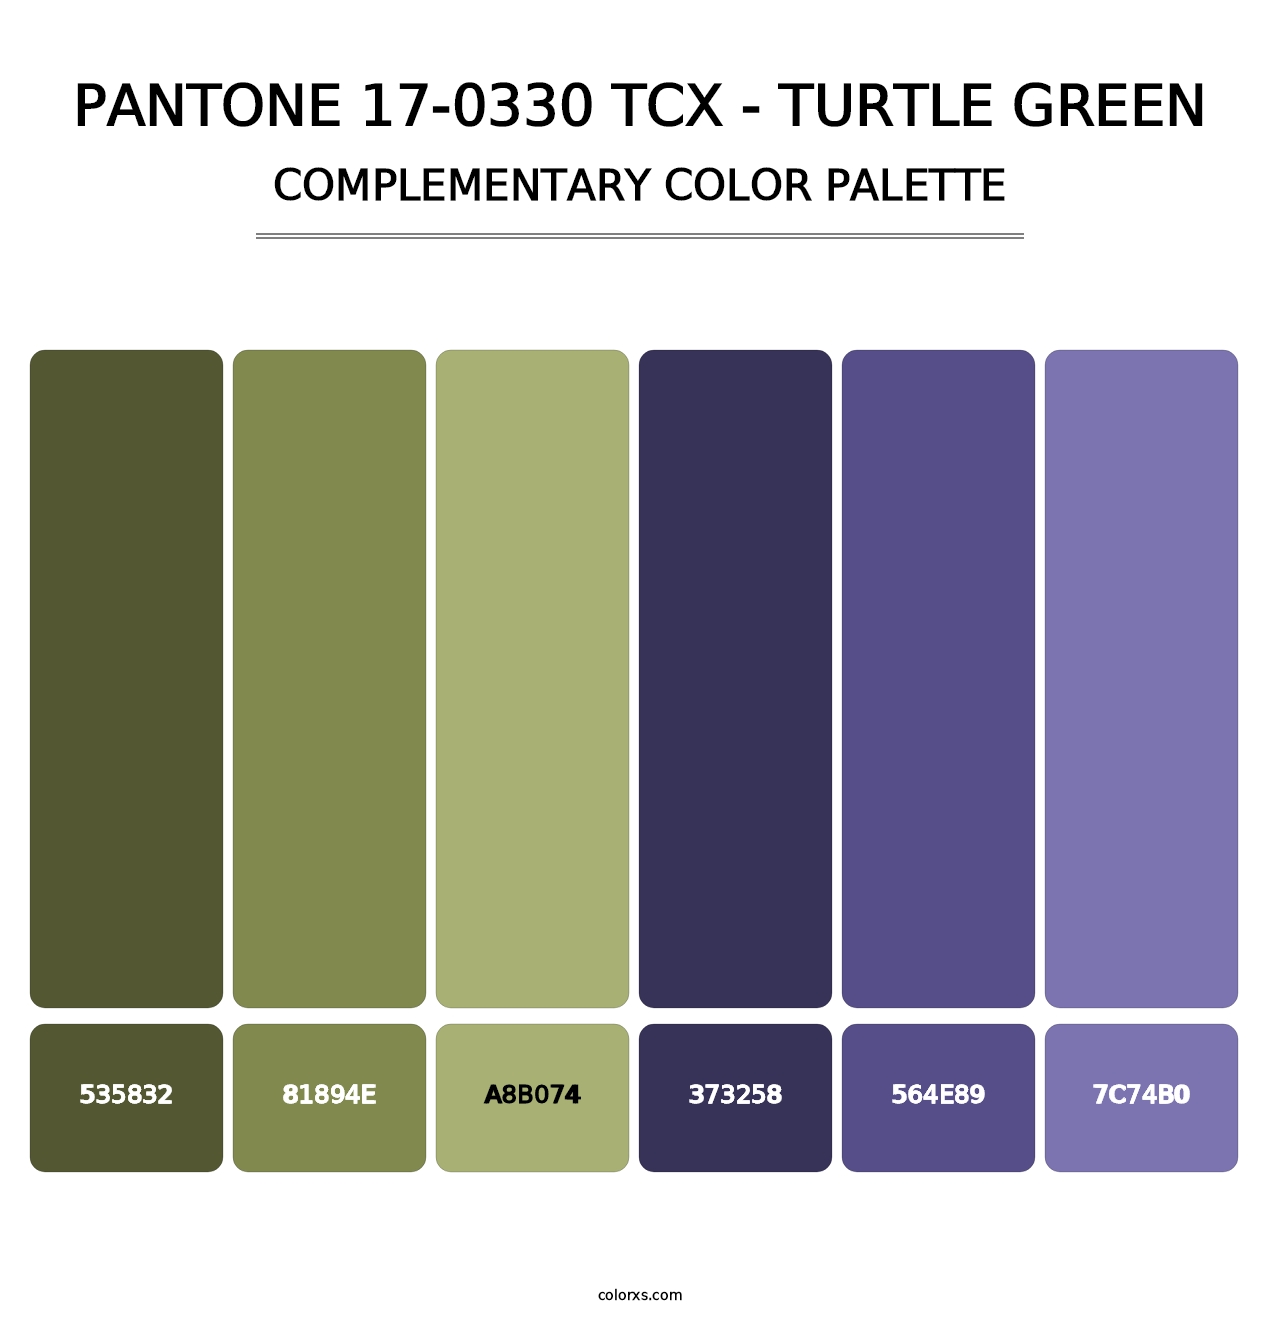 PANTONE 17-0330 TCX - Turtle Green - Complementary Color Palette